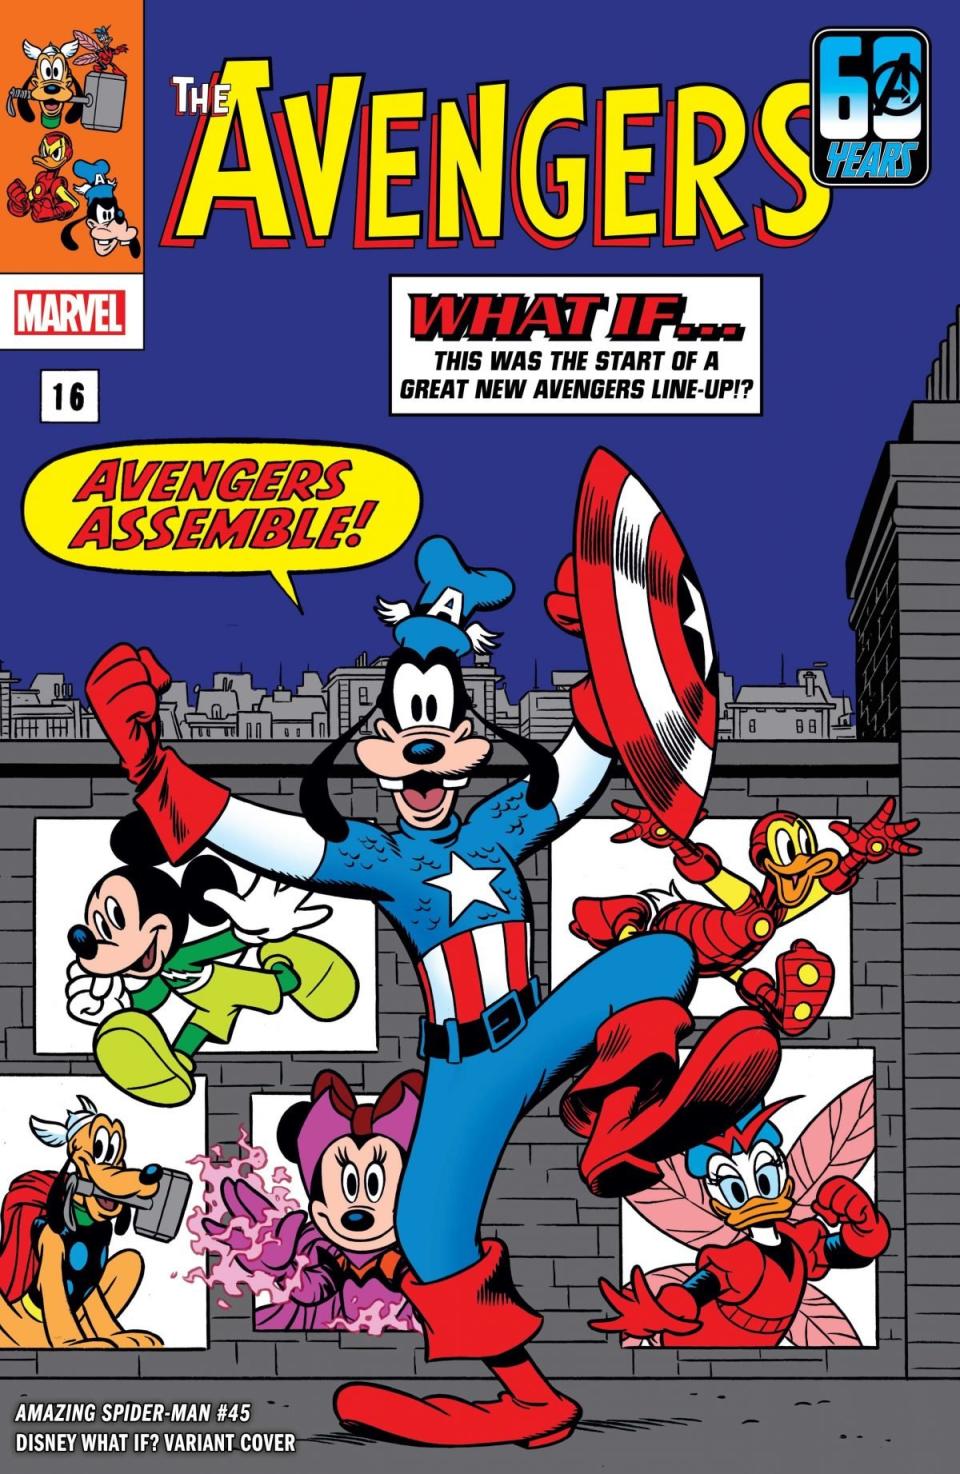 Disney Crossover with Marvel Comics to celebrate Avengers and X-Men - Avengers variant cover with Captain america goofy and more